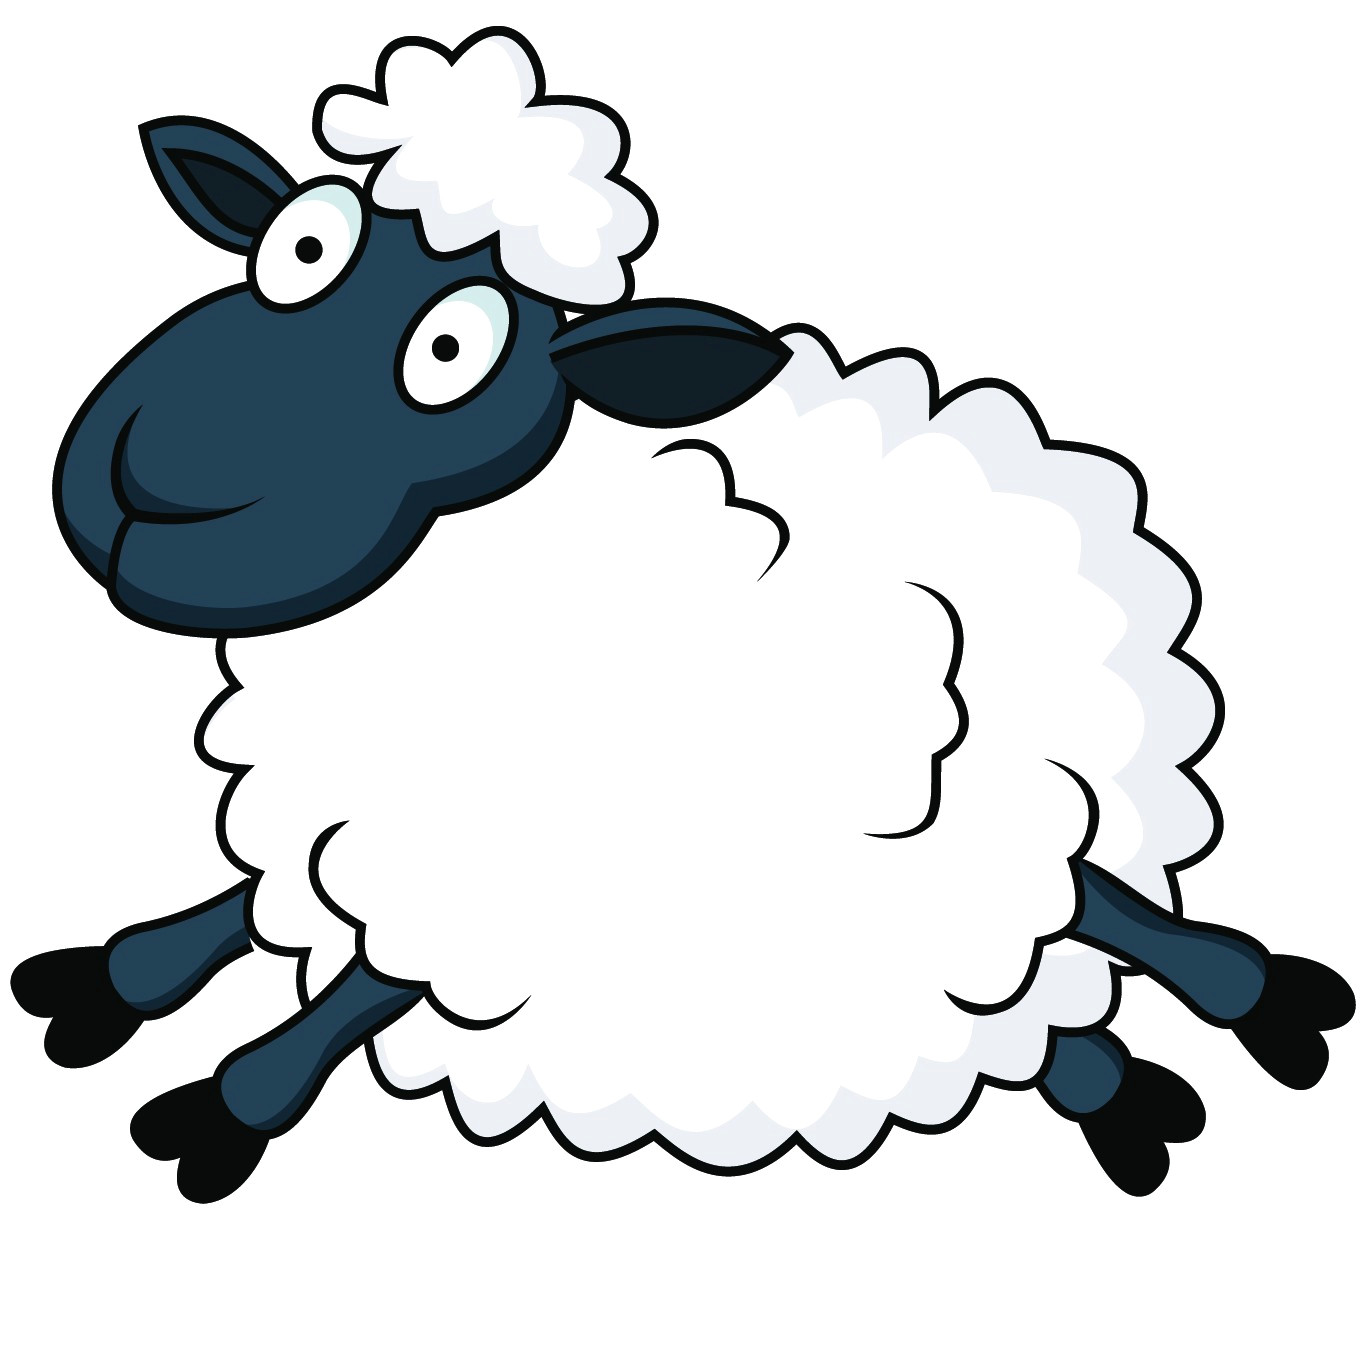 Drawing A Cartoon Sheep Free Cartoon Lamb Pictures Download Free Clip Art Free Clip Art On